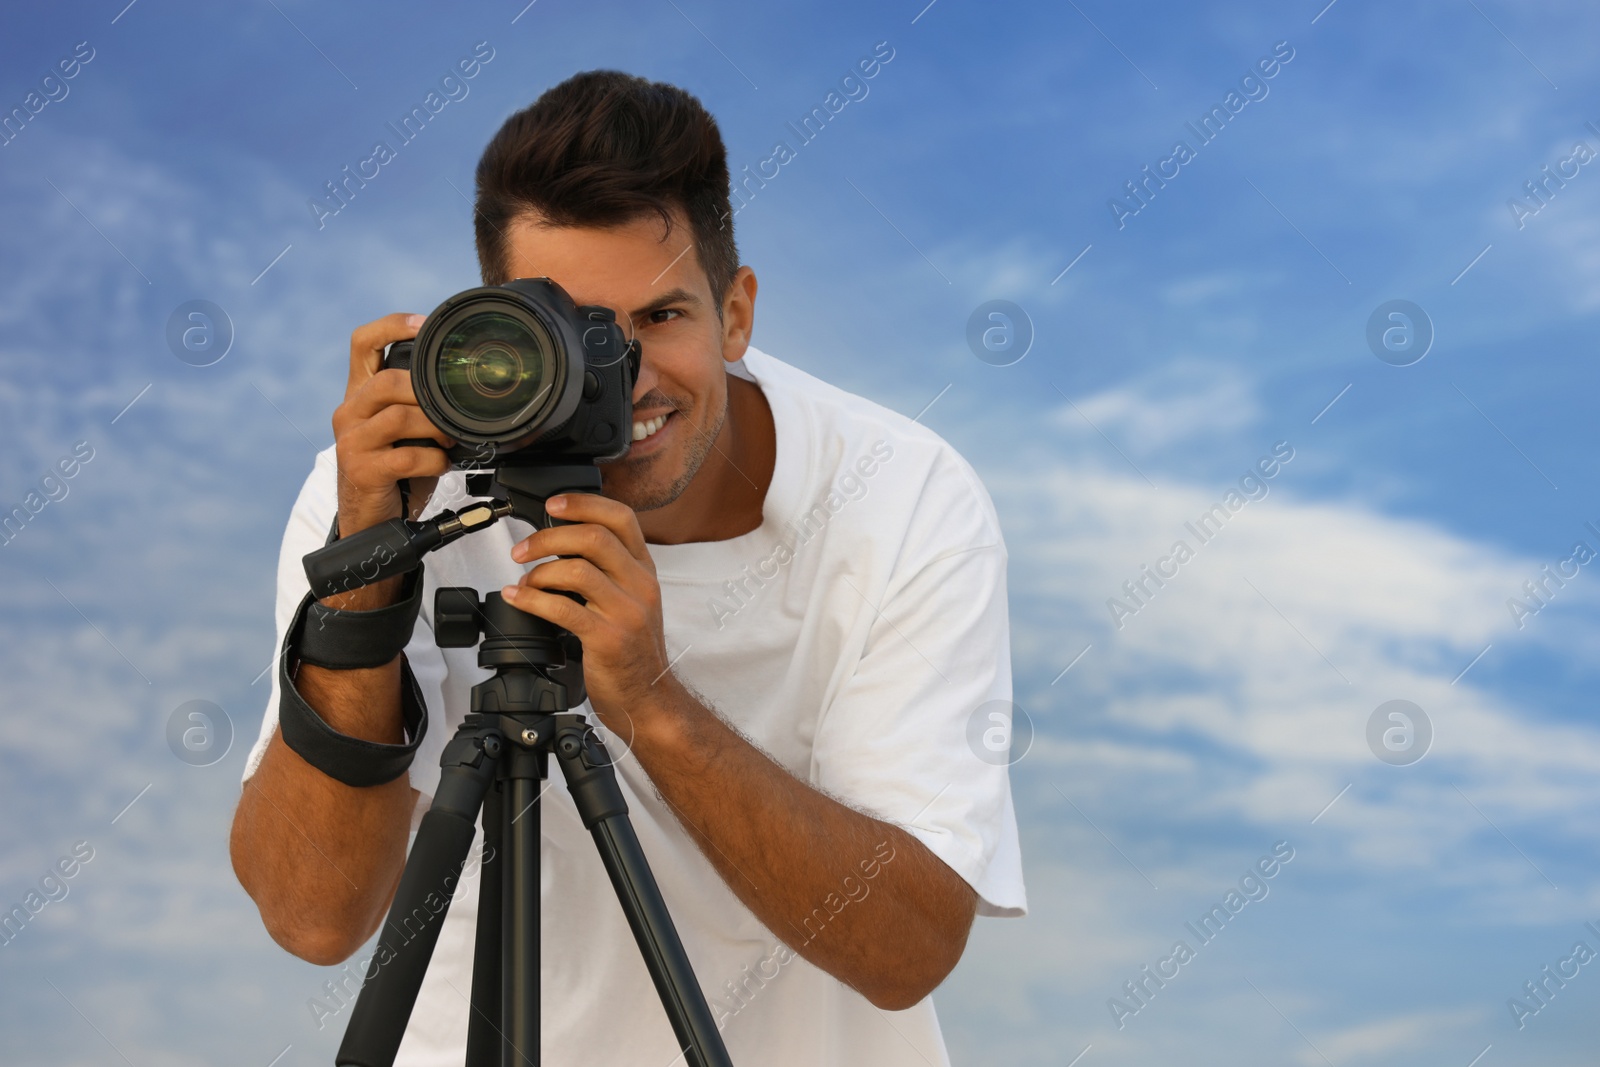 Photo of Photographer taking picture with professional camera outdoors